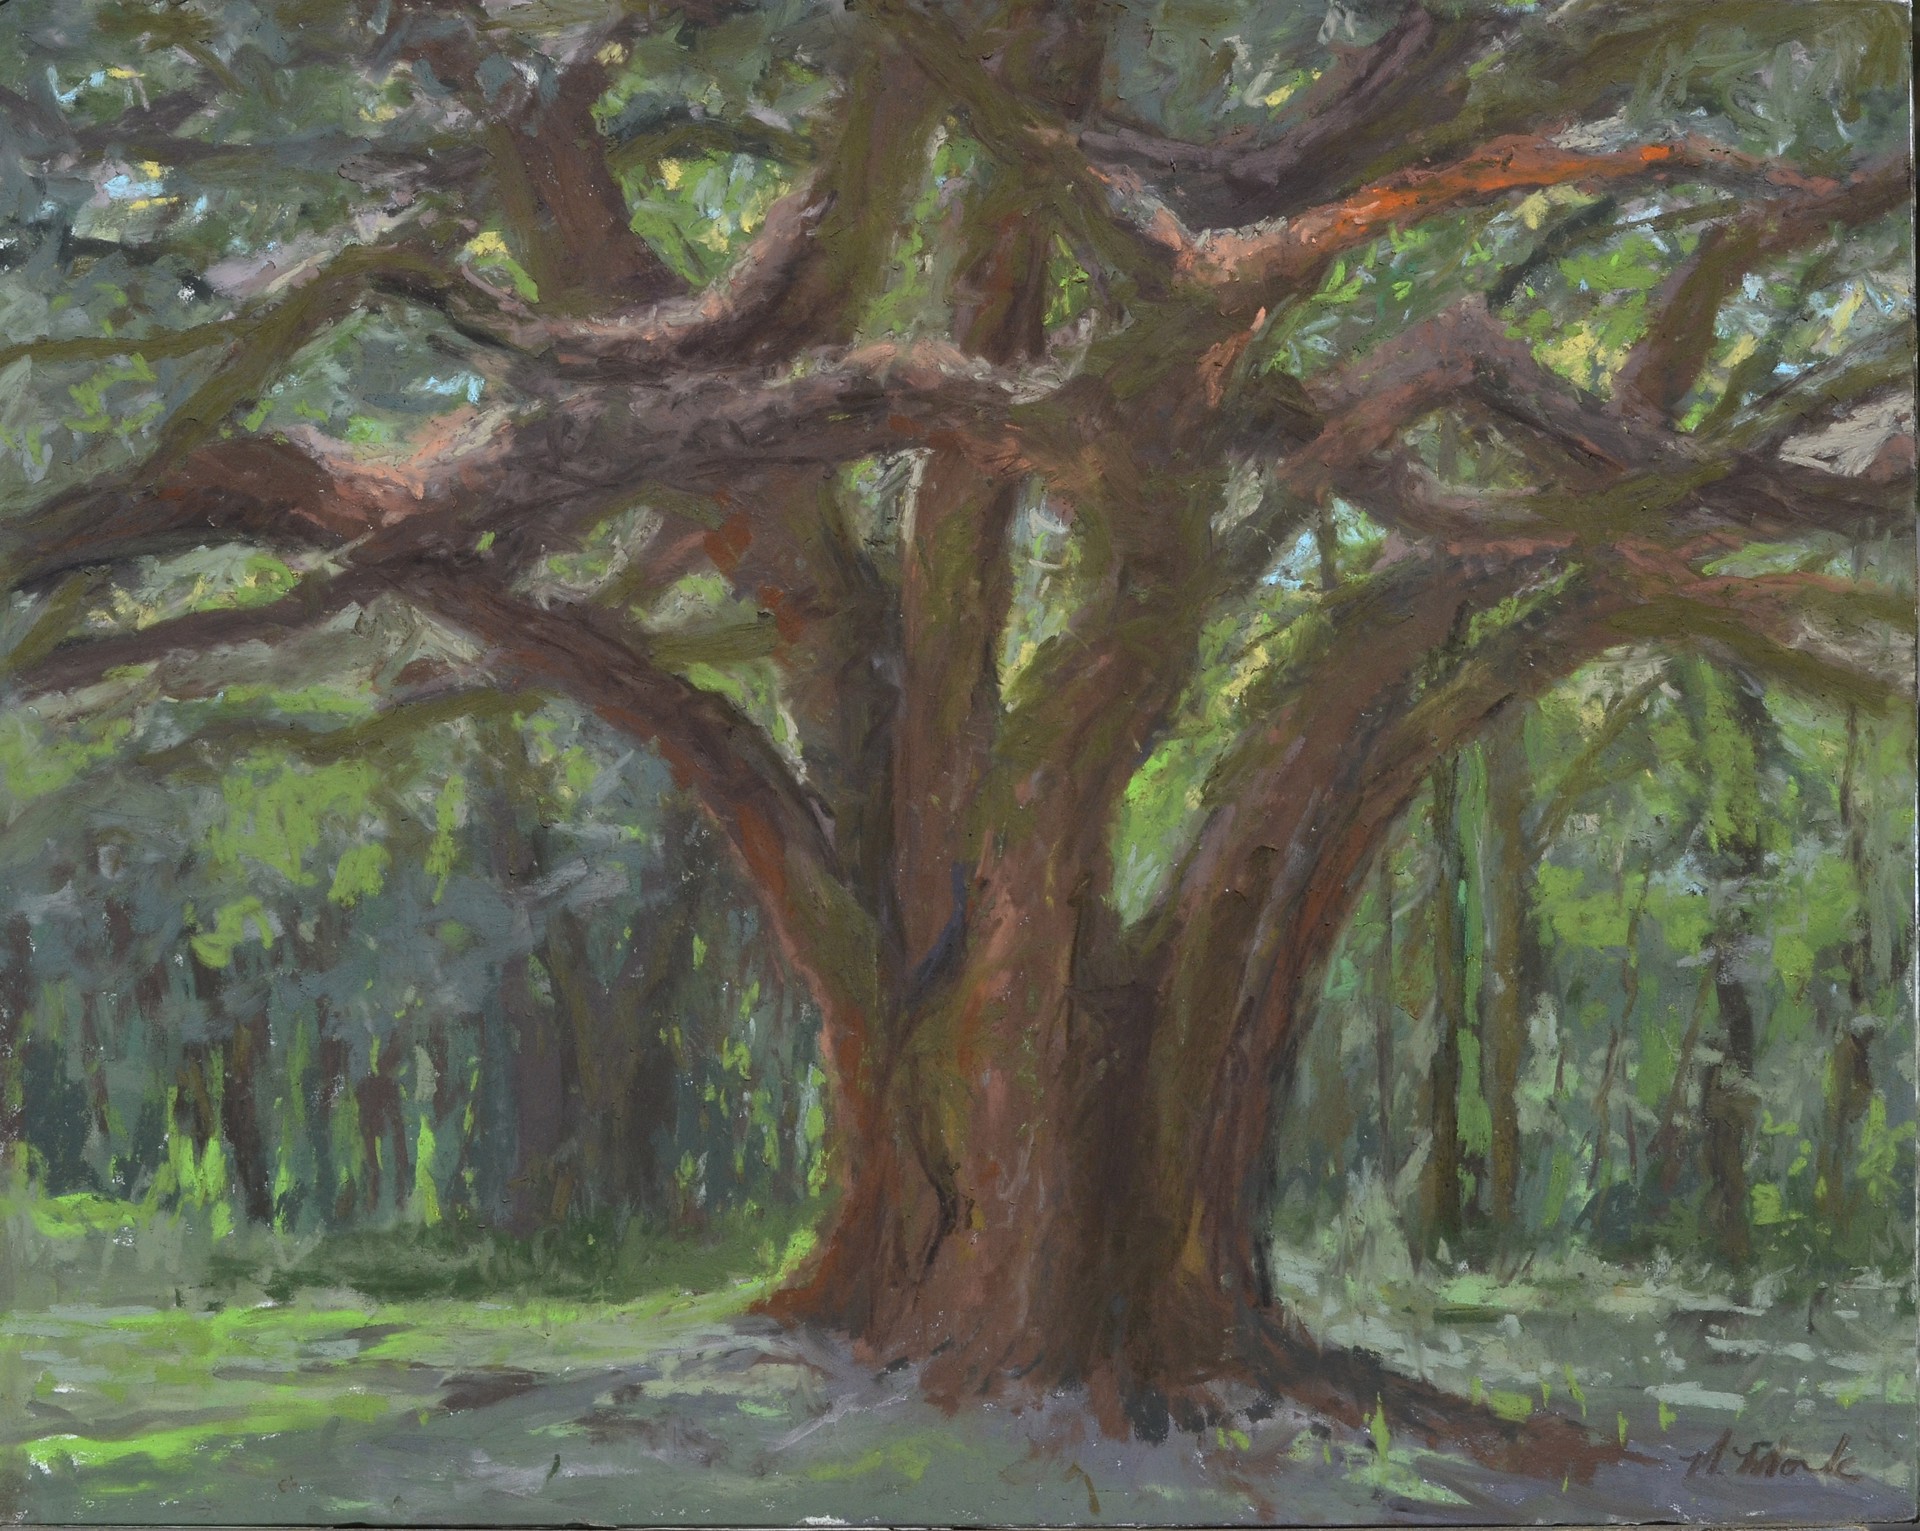 Oak Tree in the Morning Light by Mary Monk